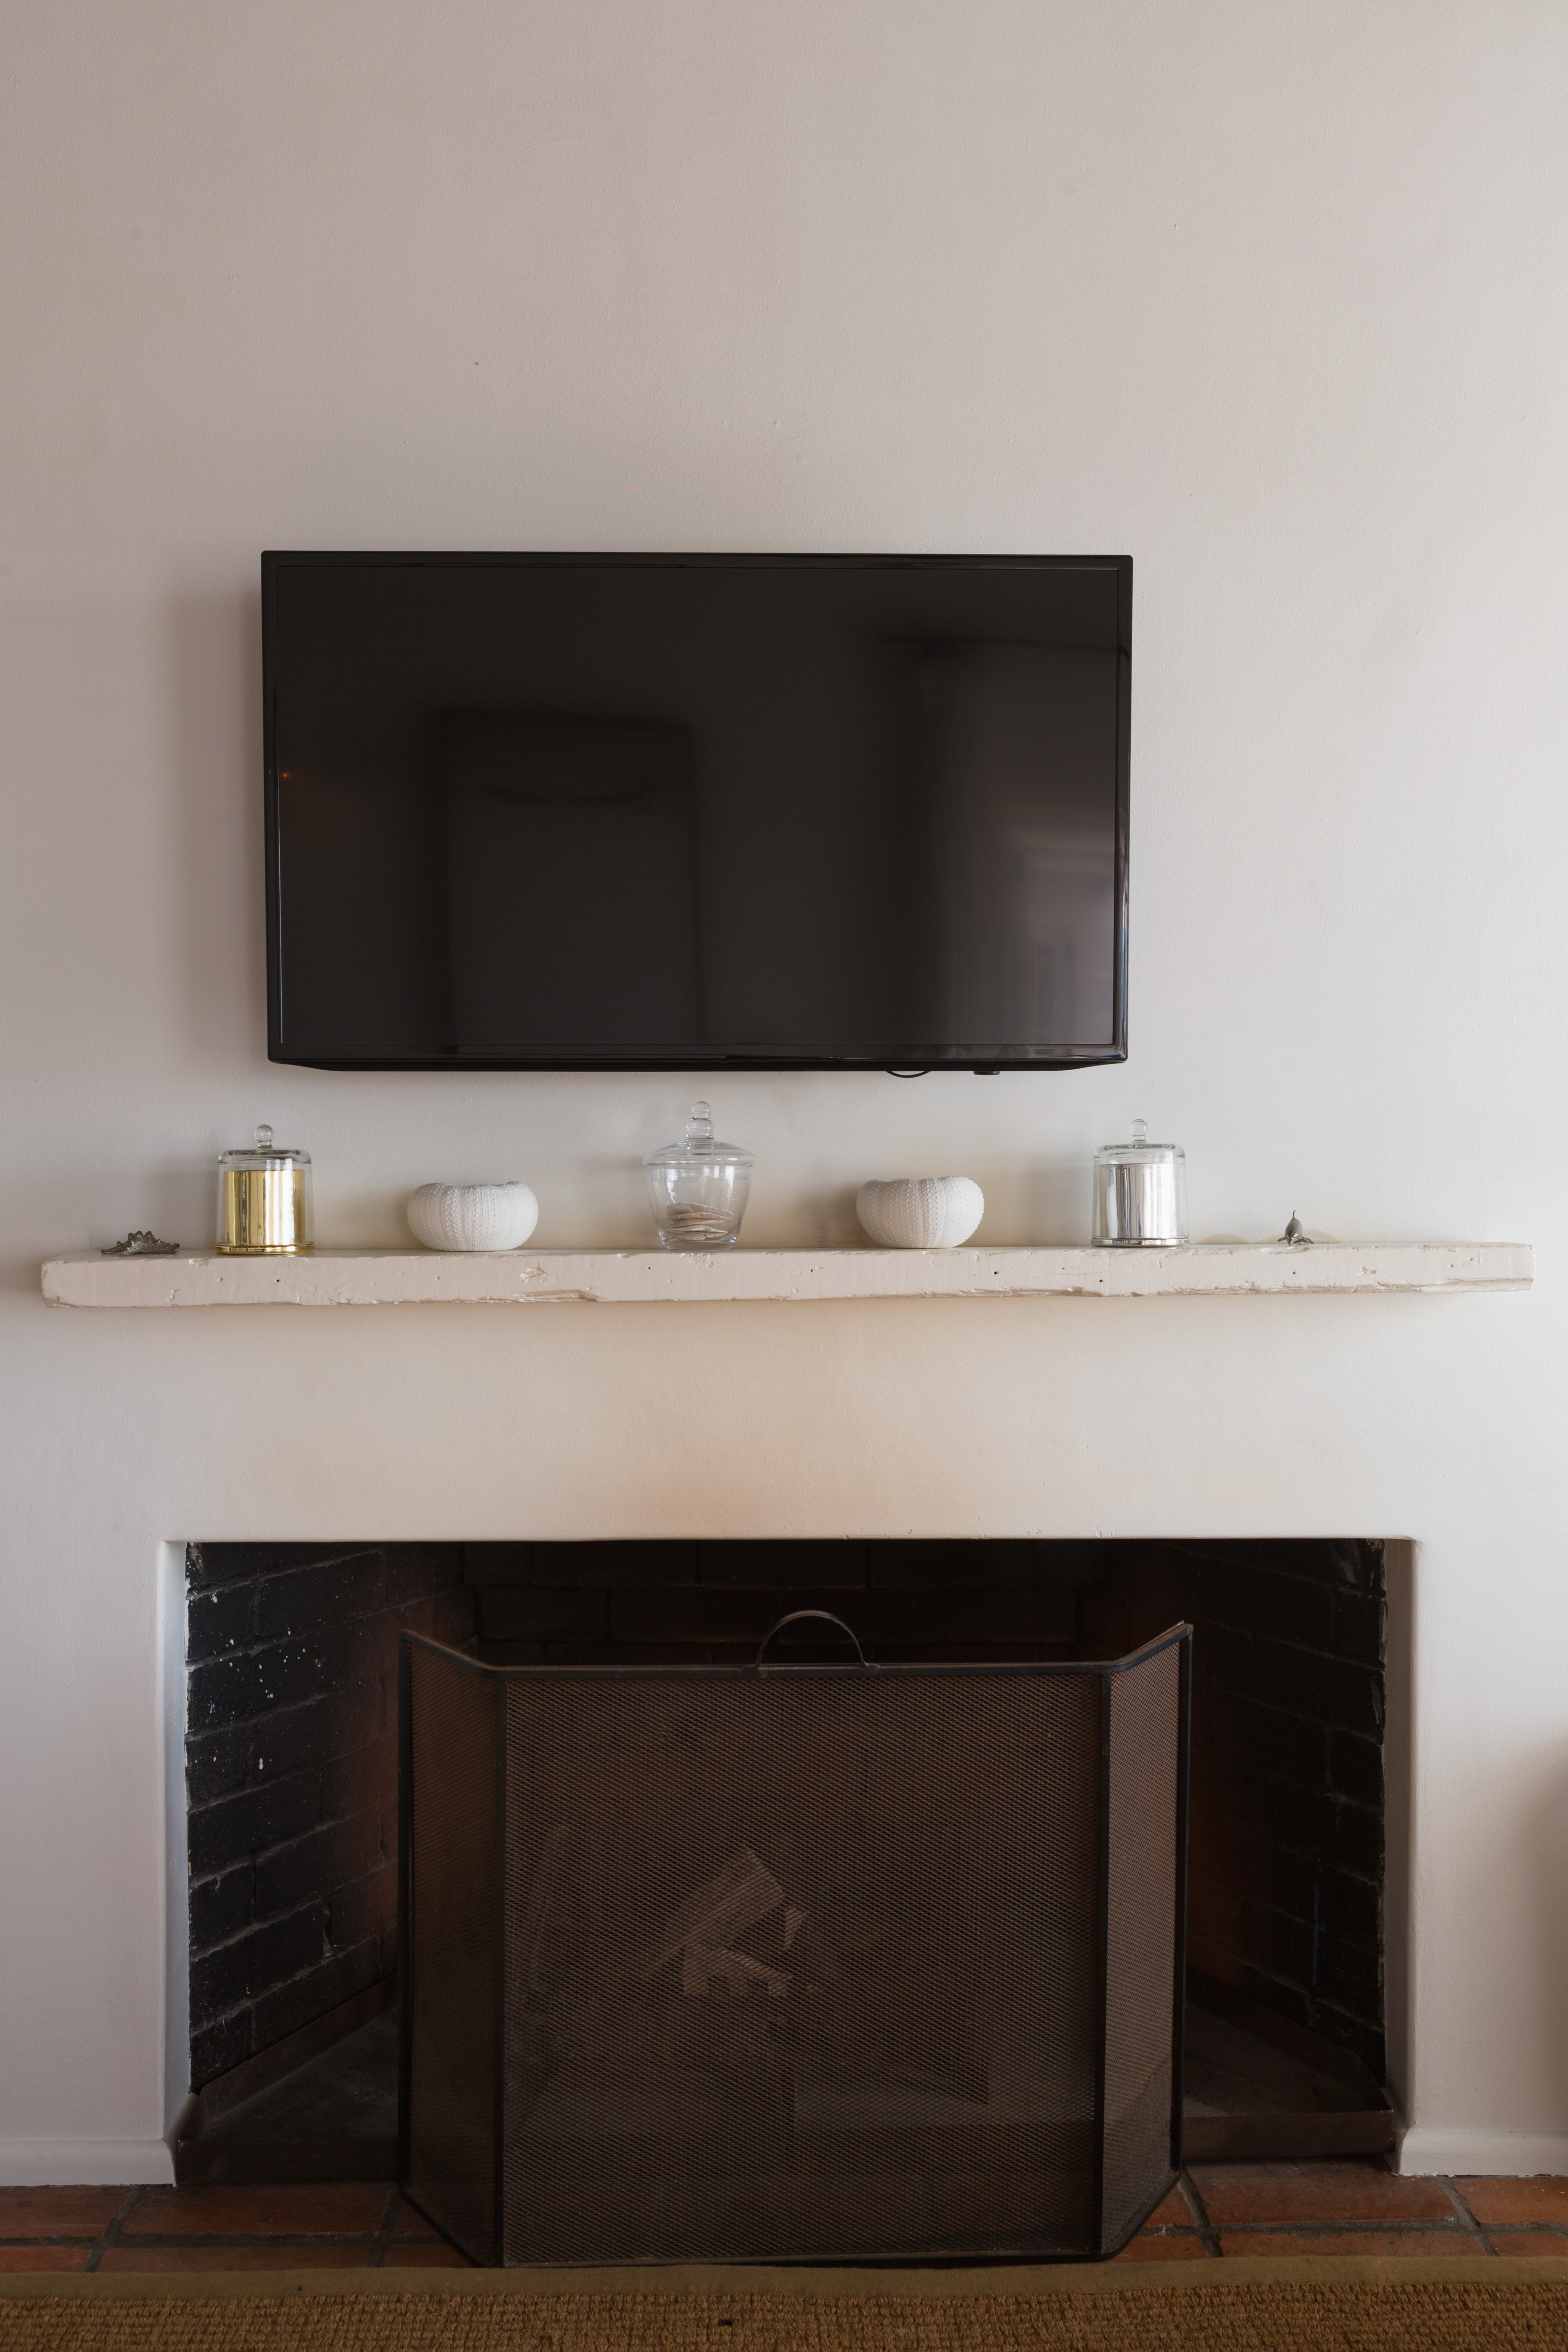 Fireplace with a mounted TV above, decorative candles on the mantle, and a protective screen